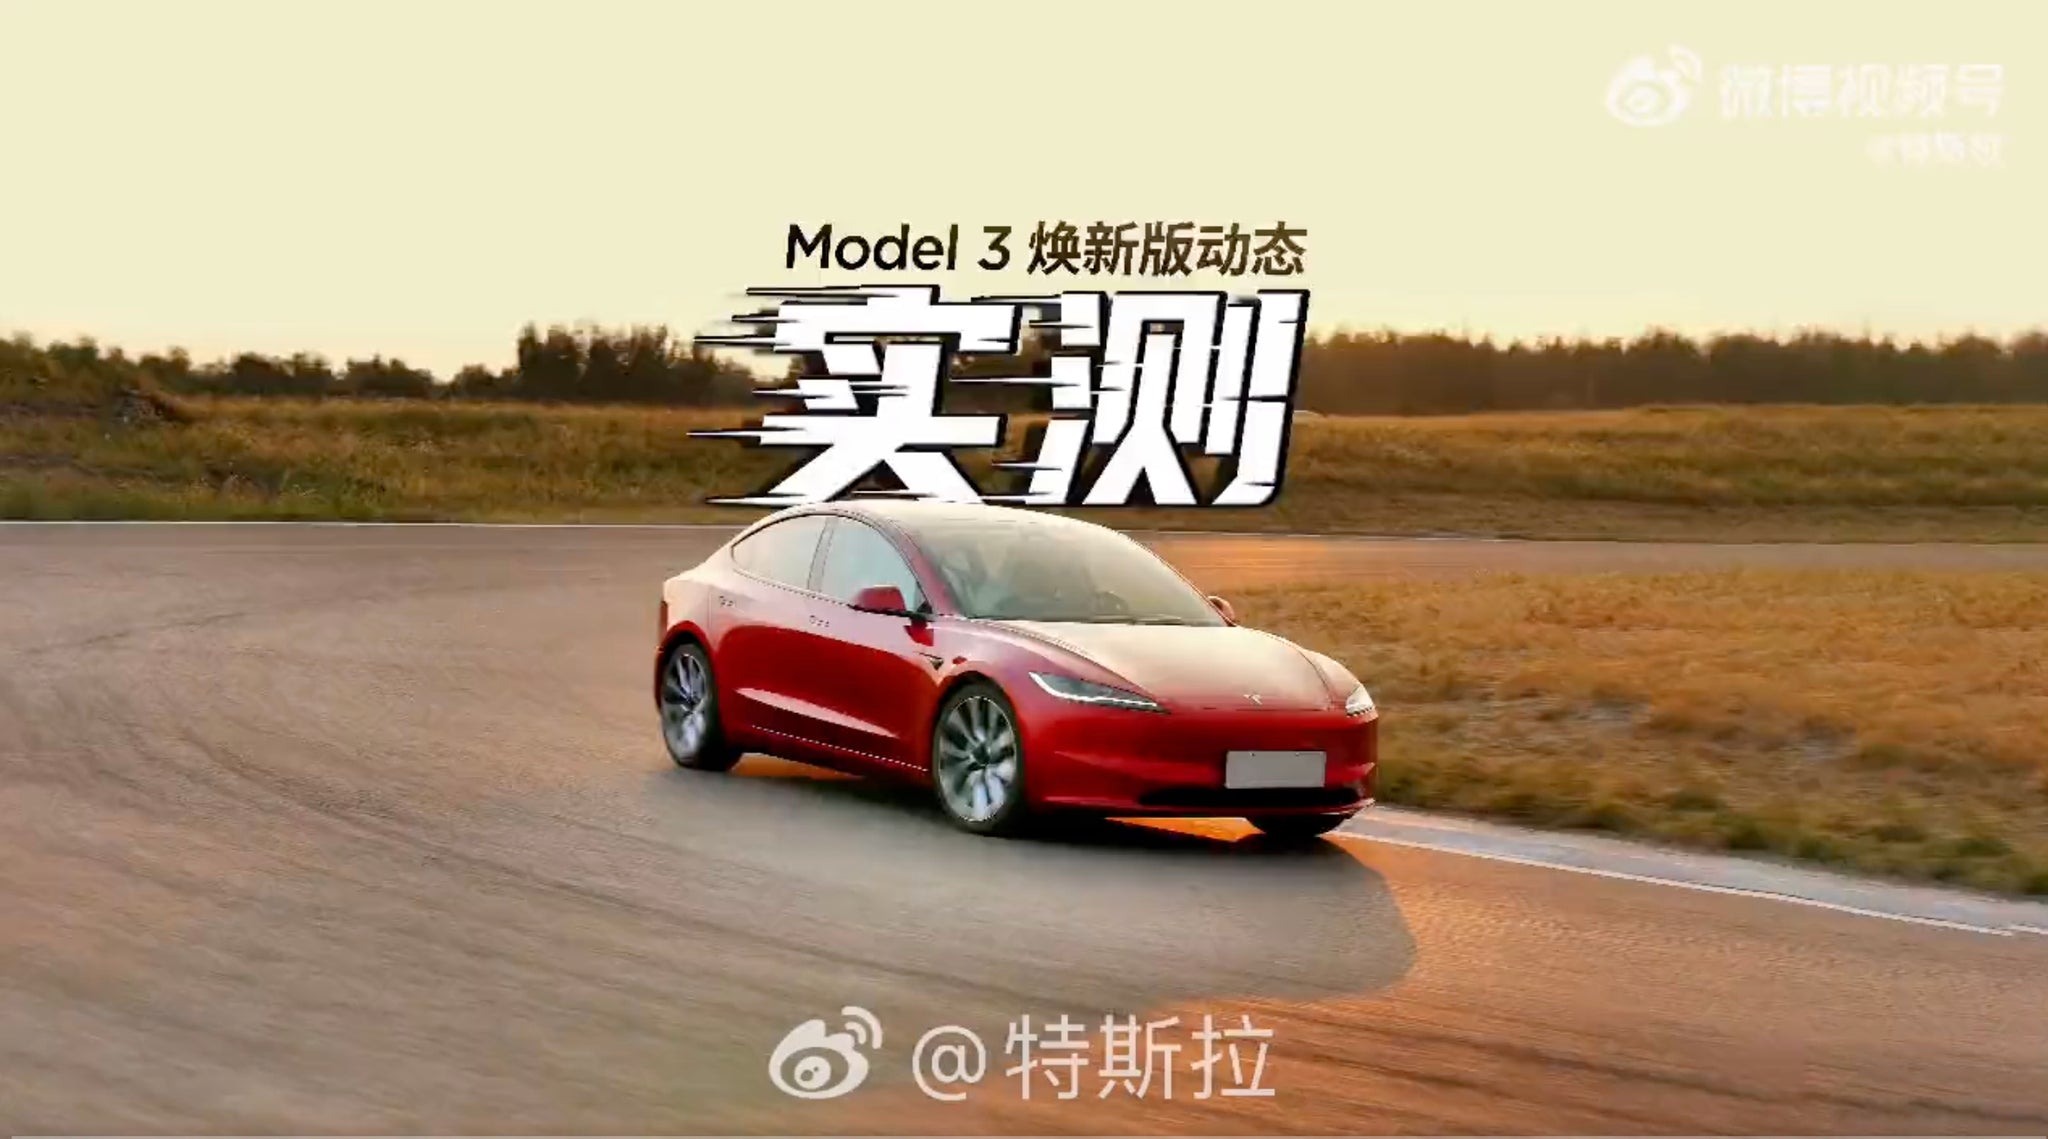 New Tesla Model 3 Developed Mainly By China Engineering Team, Confirms VP Lars Moravy